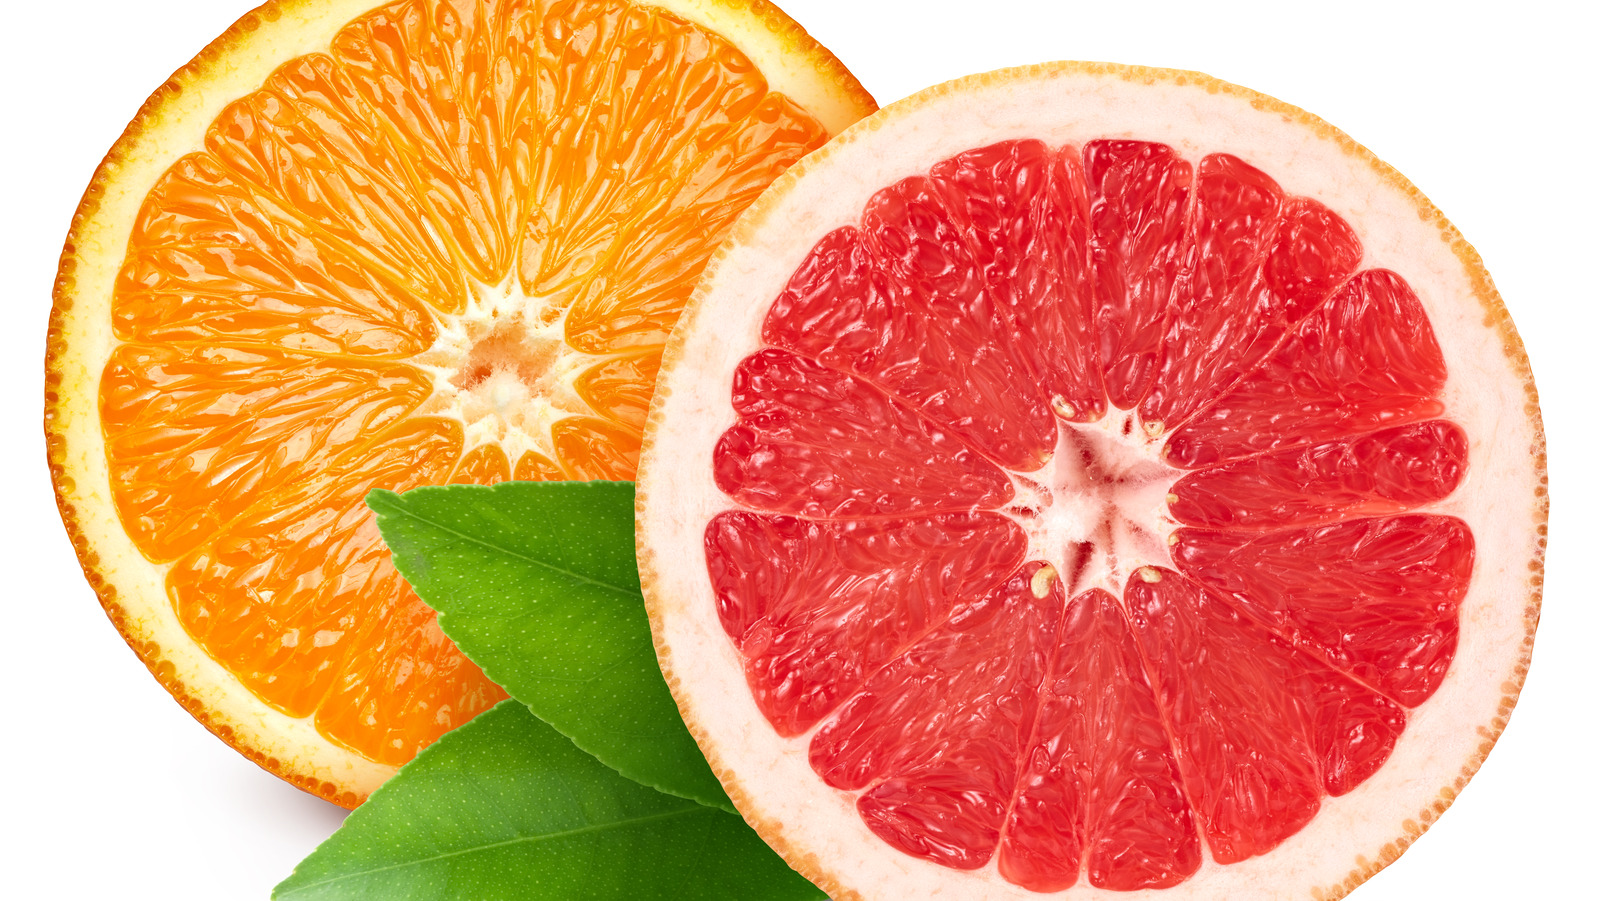 Is There A Nutritional Difference Between Grapefruits And Oranges?